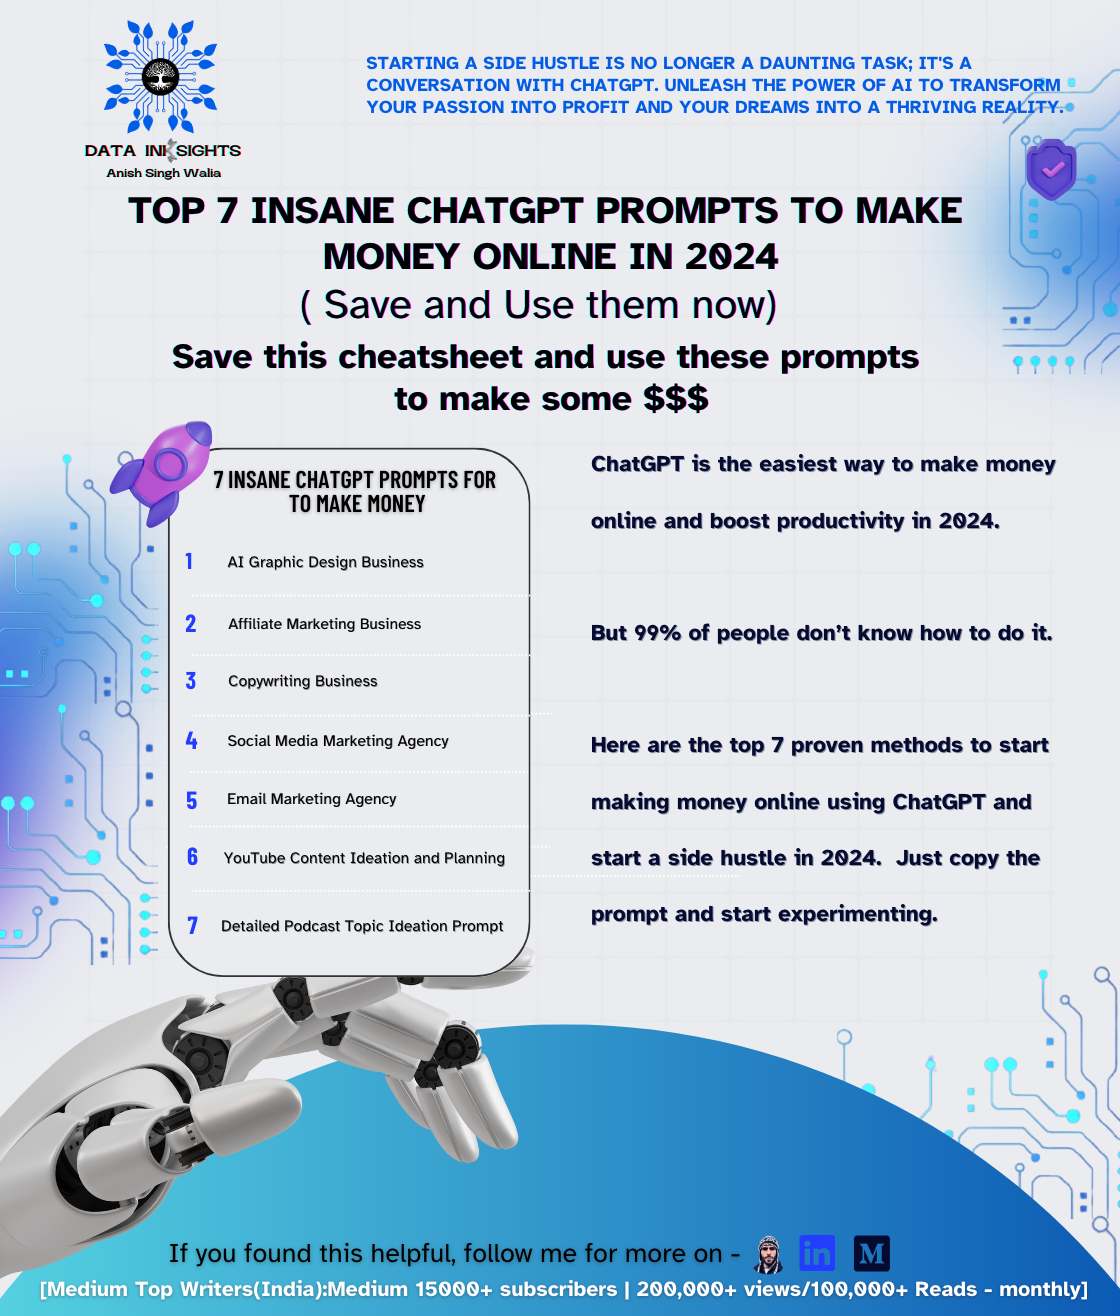 Top 7 Insane ChatGPT Prompts to Make Money Online in 2024 𝐀𝐈 𝐦𝐨𝐧𝐤𝐬.𝐢𝐨